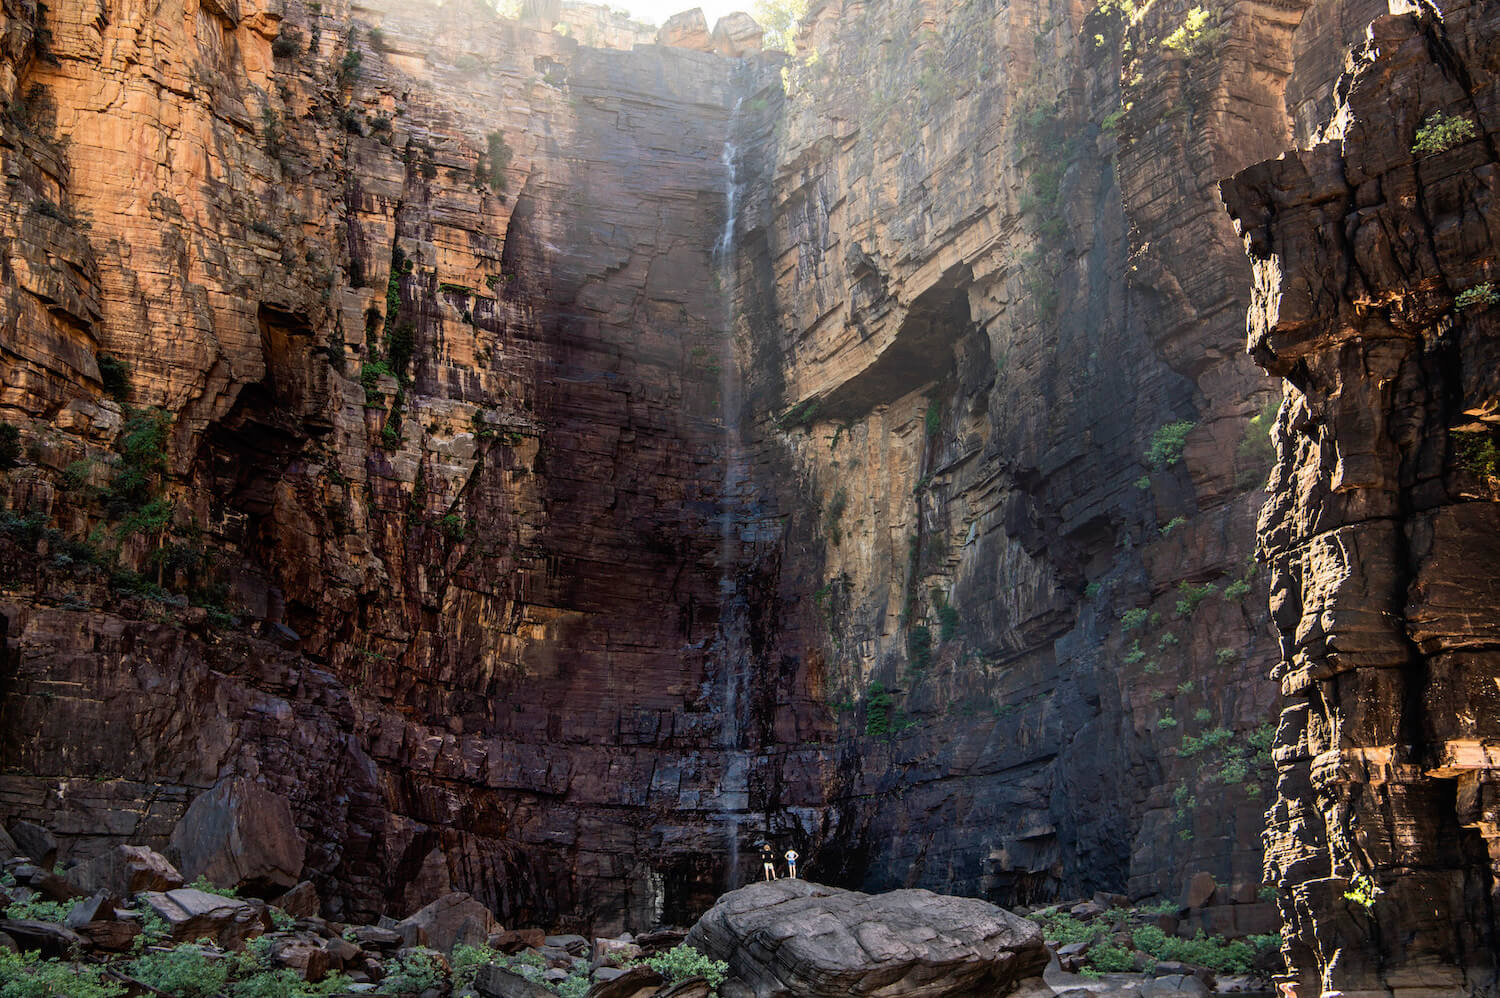 Visitors dwarfed by the large scale of Jim Jim Falls in Kakadu.<br /><br />Covering nearly 20,000 square kilometres, Kakadu National Park is teeming with wildlife, home to important Aboriginal rock art sites, and takes in diverse and exotic landscape.